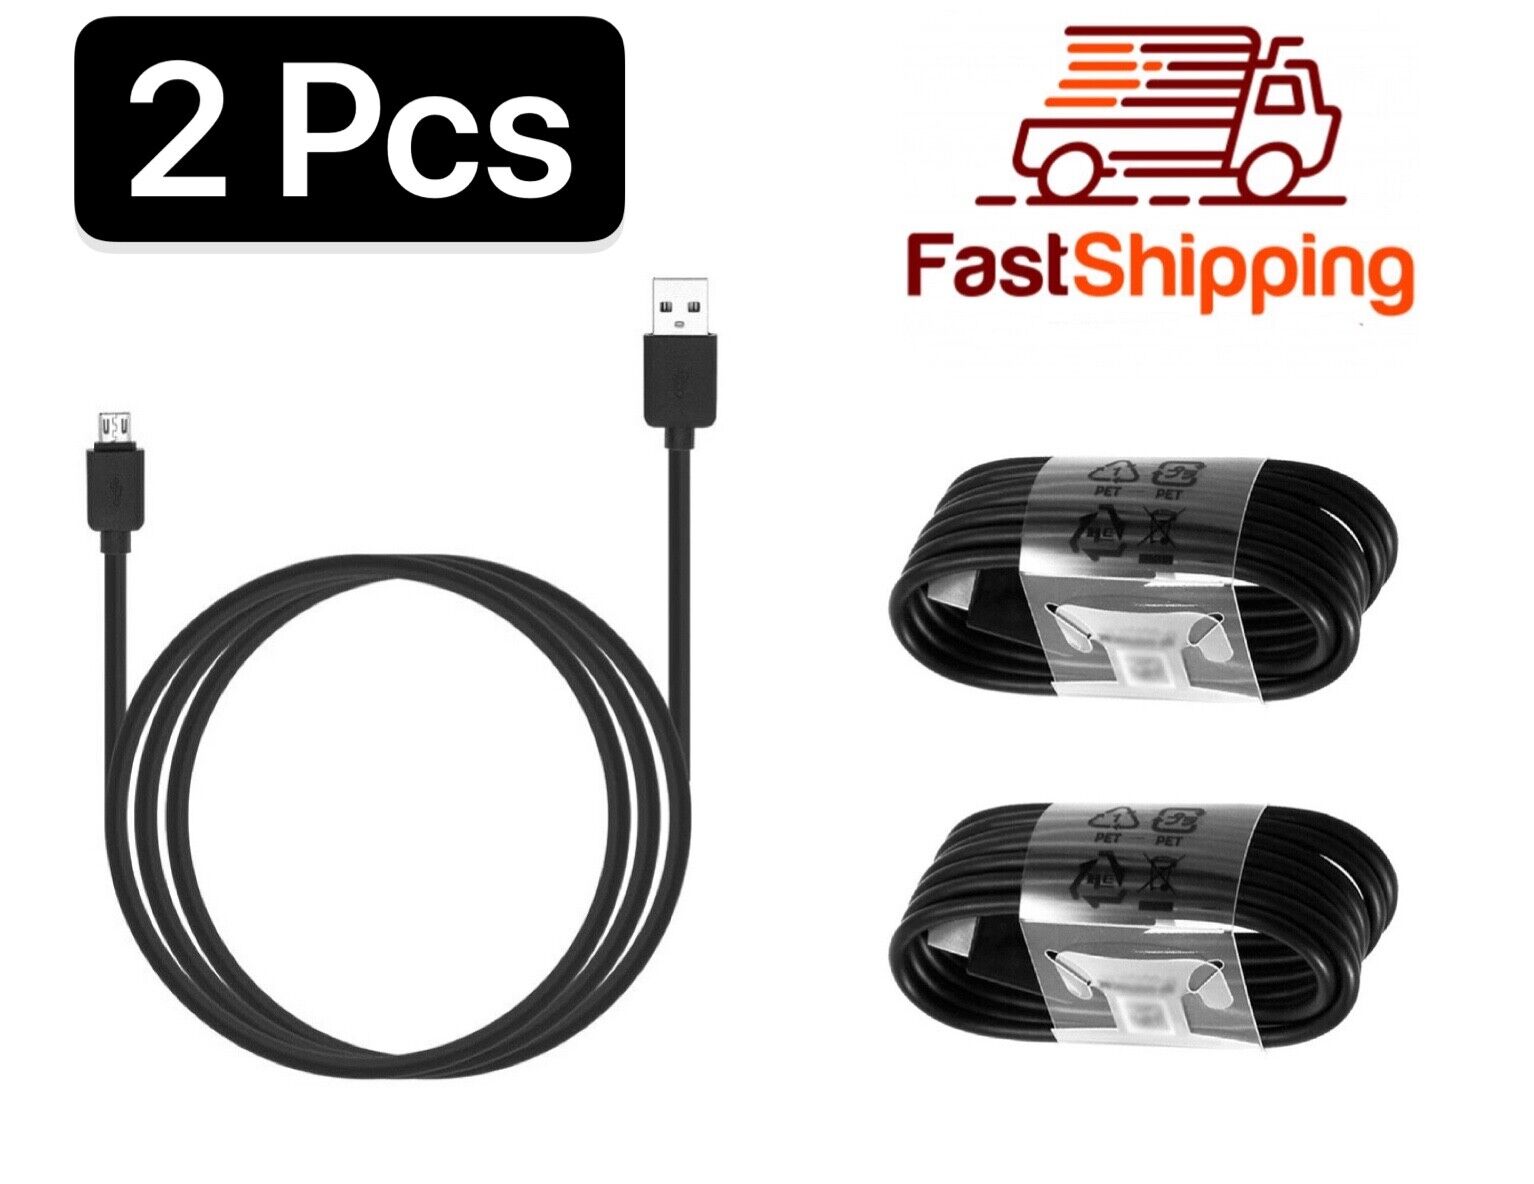 2 Pcs Micro USB Data Cable Cord Charger for Amazon Kindle Fire 2 HD 7 Tablet Bk Unbranded/Generic Not Applicable